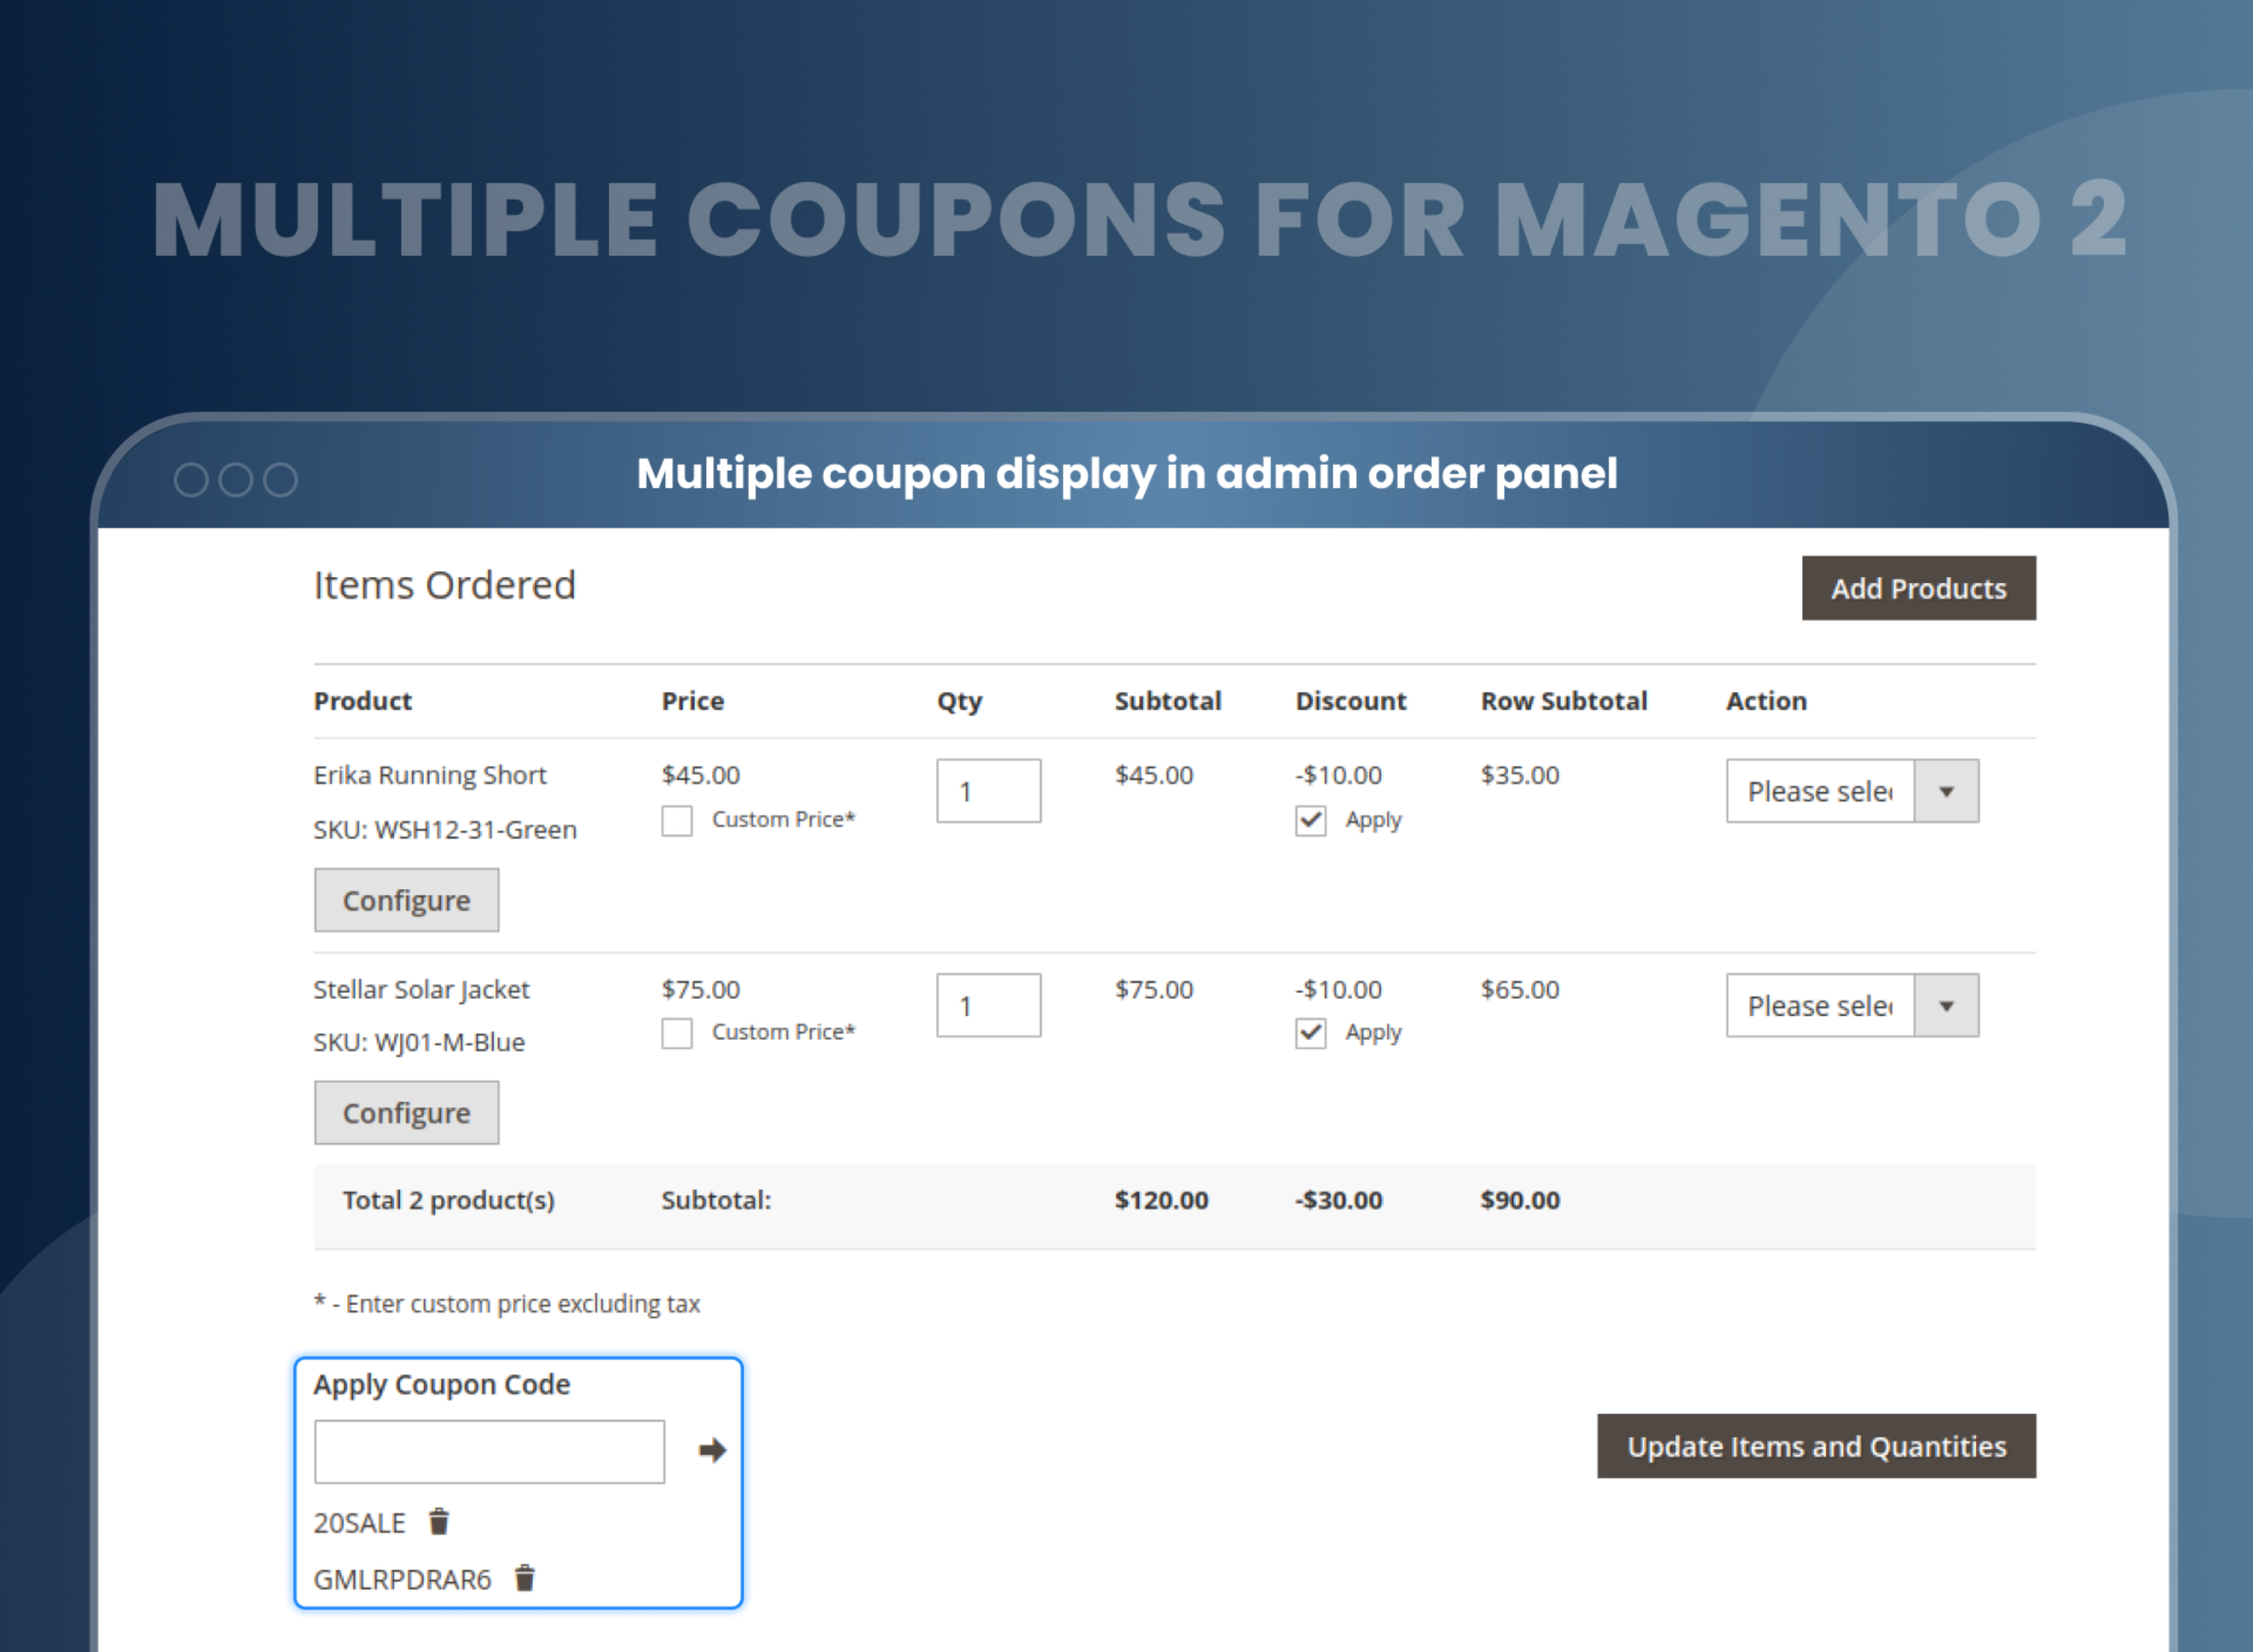 Multiple coupon display in admin order panel